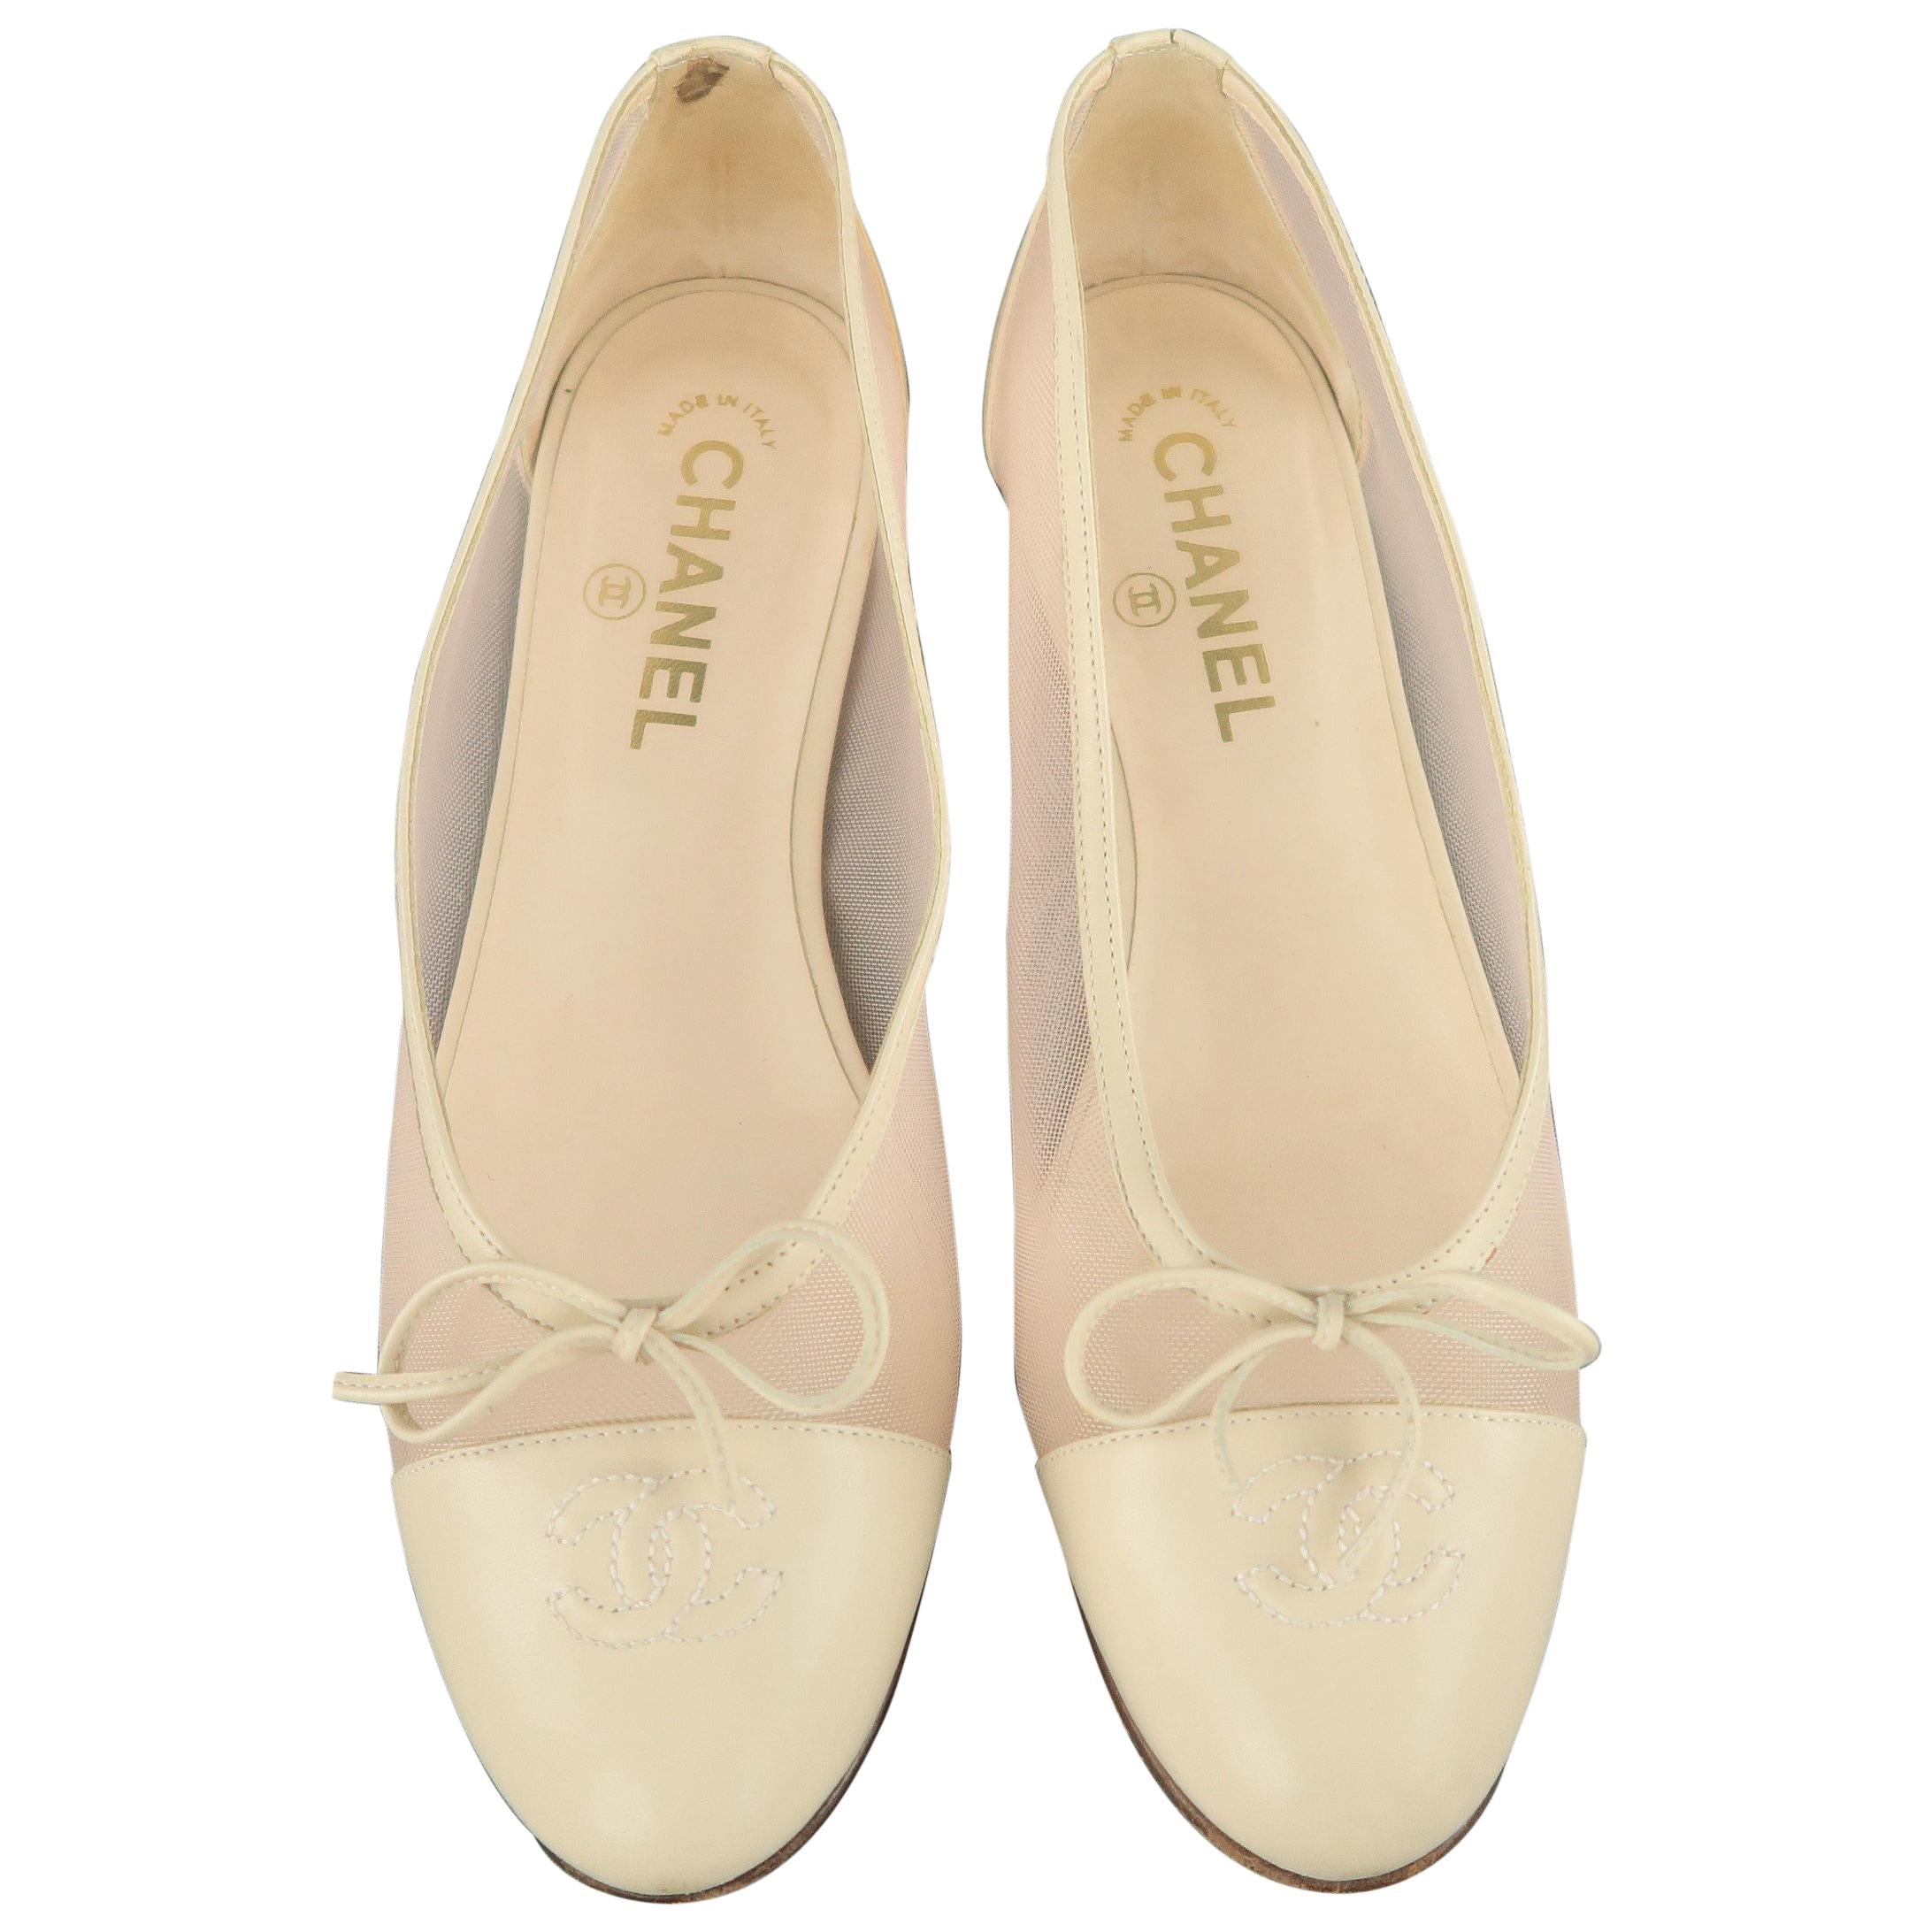 CHANEL Size 8.5 Beige Leather Pink Mesh CC Bow Cap Toe Flats